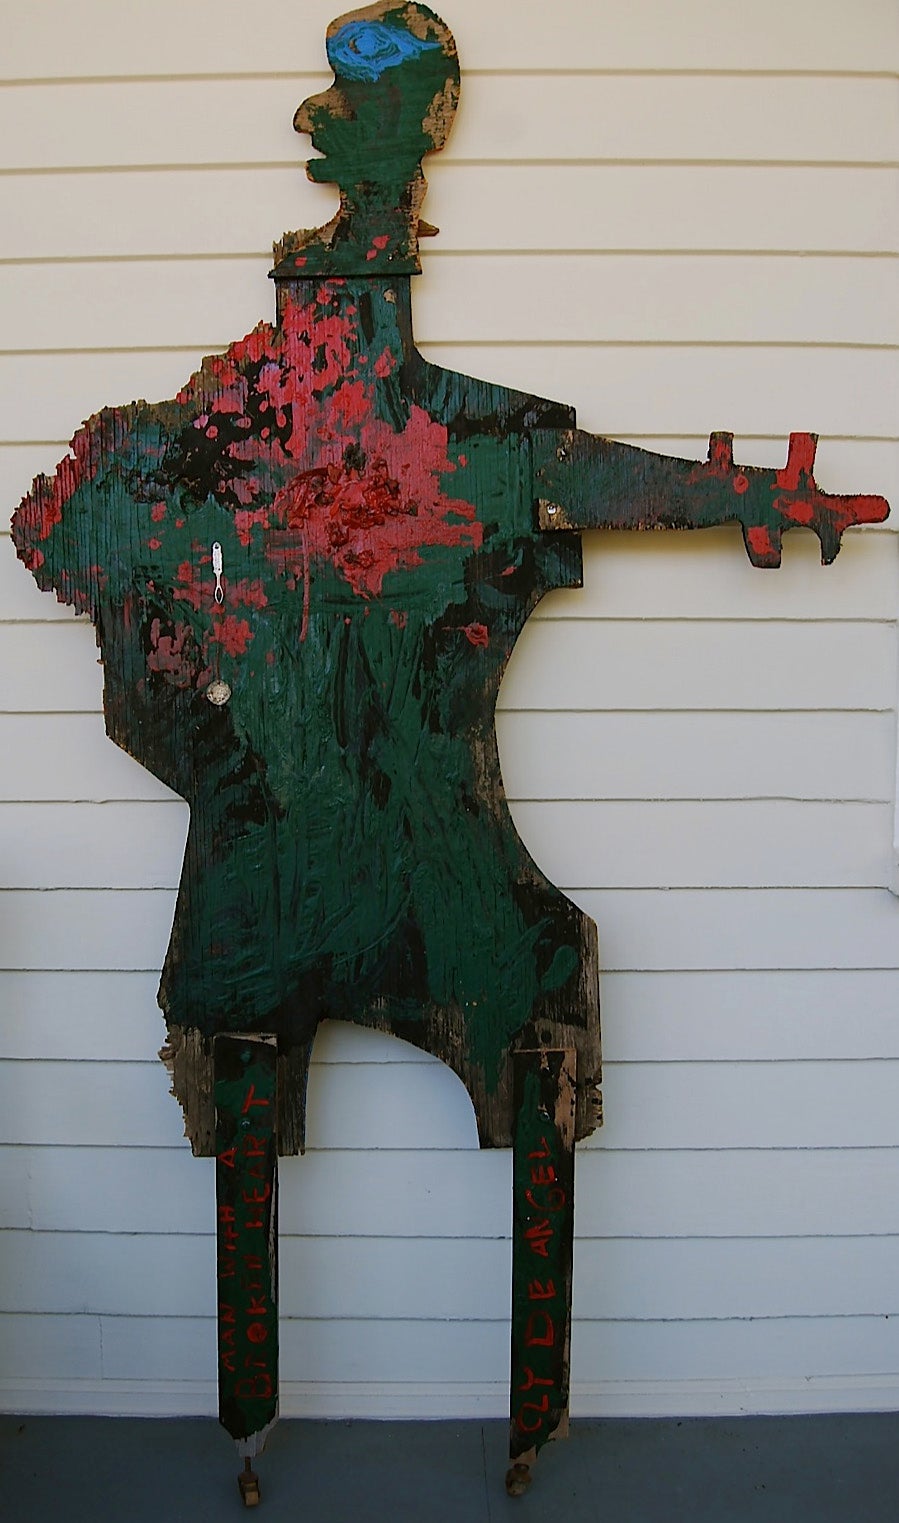 Outsider Artist Clyde Angel "A Man With A Broken Heart" For Sale